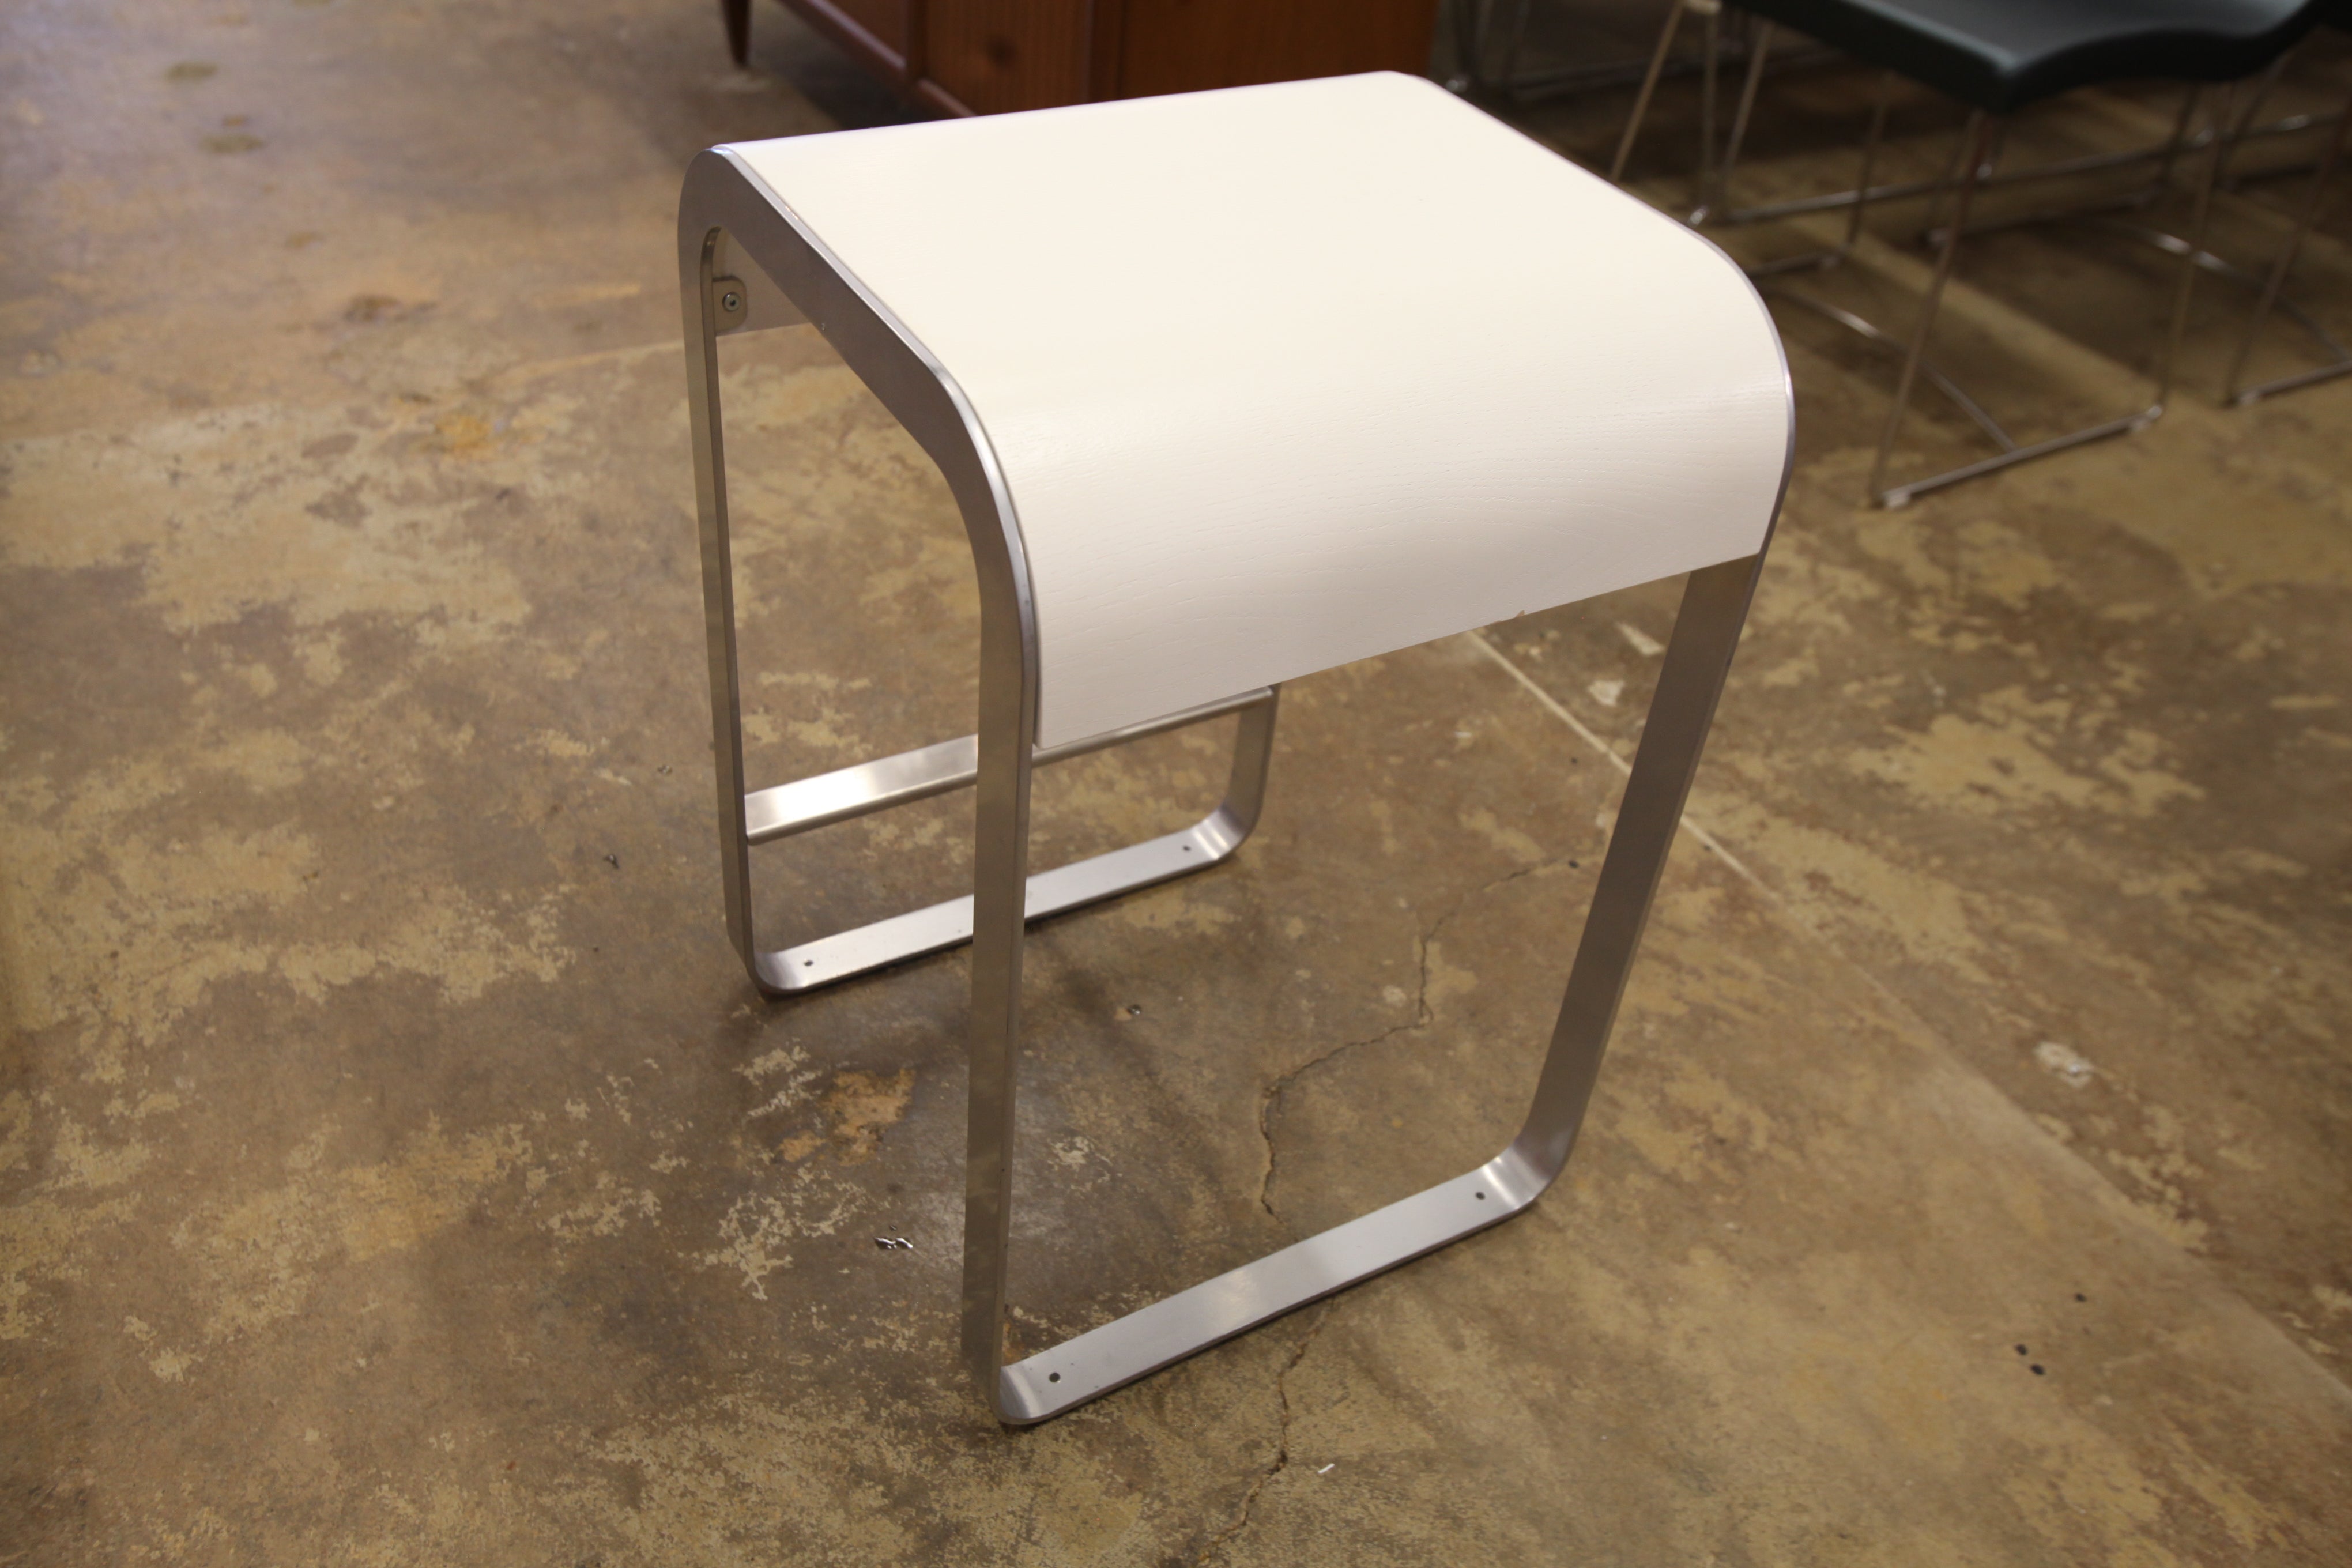 Vintage Metal/Wood Stool by Pure Design (white) (16" x 16" x 24"H)